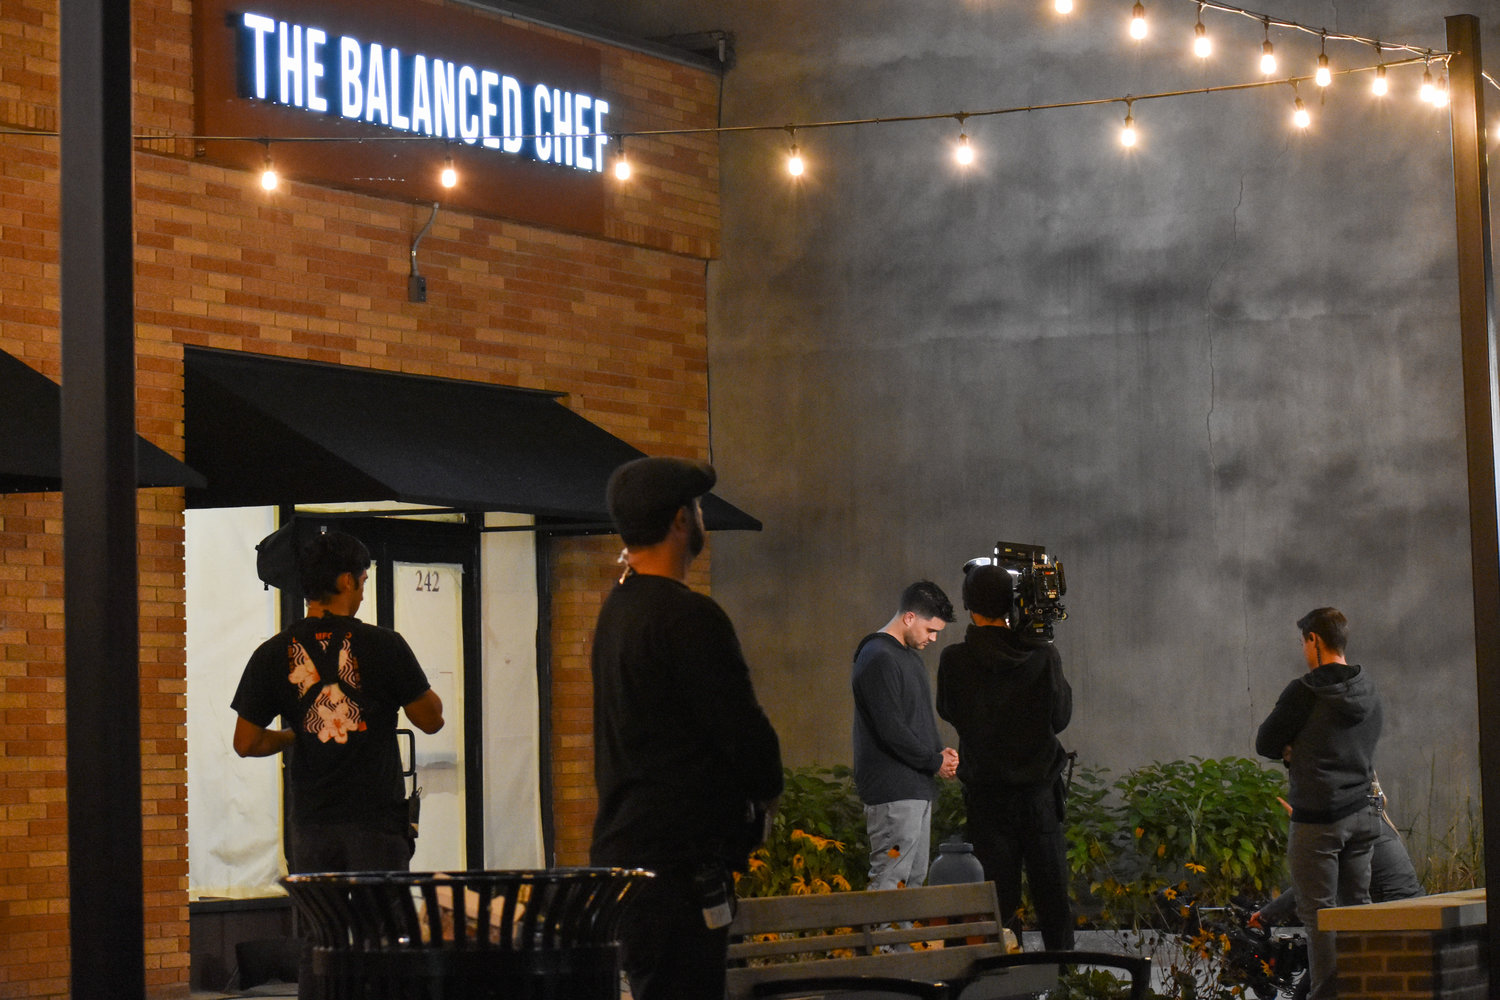 Production crew stand outside The Balanced Chef at 242 West Dominick Street in Rome on Thursday evening. The restaurant will be on the Food Network T.V. show, “Restaurant: Impossible.” Photo taken November 10, 2022.